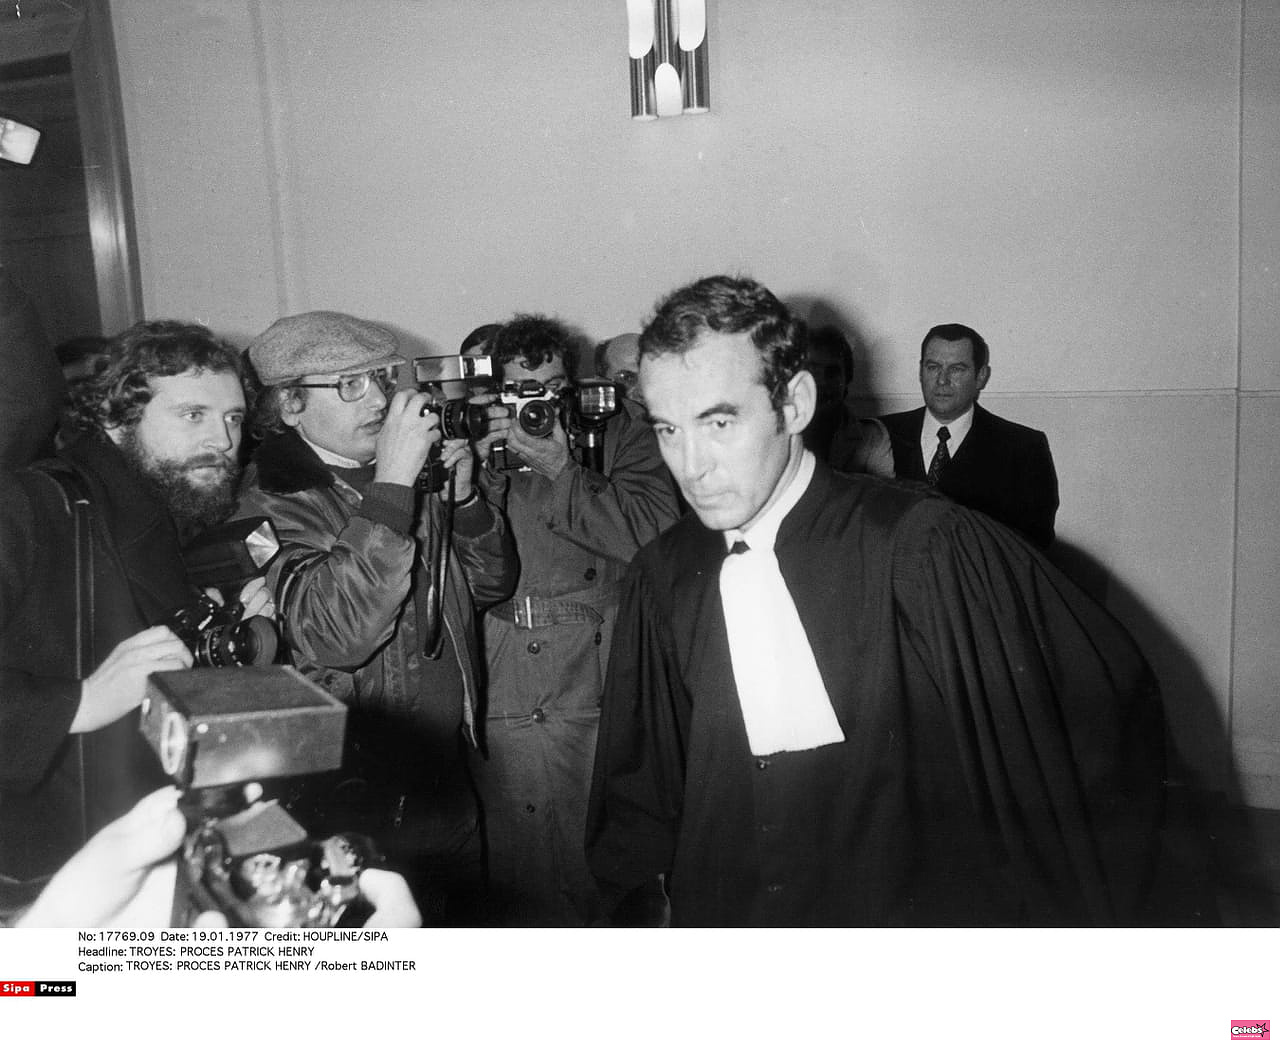 This traumatic trial which founded Robert Badinter's fight against the death penalty